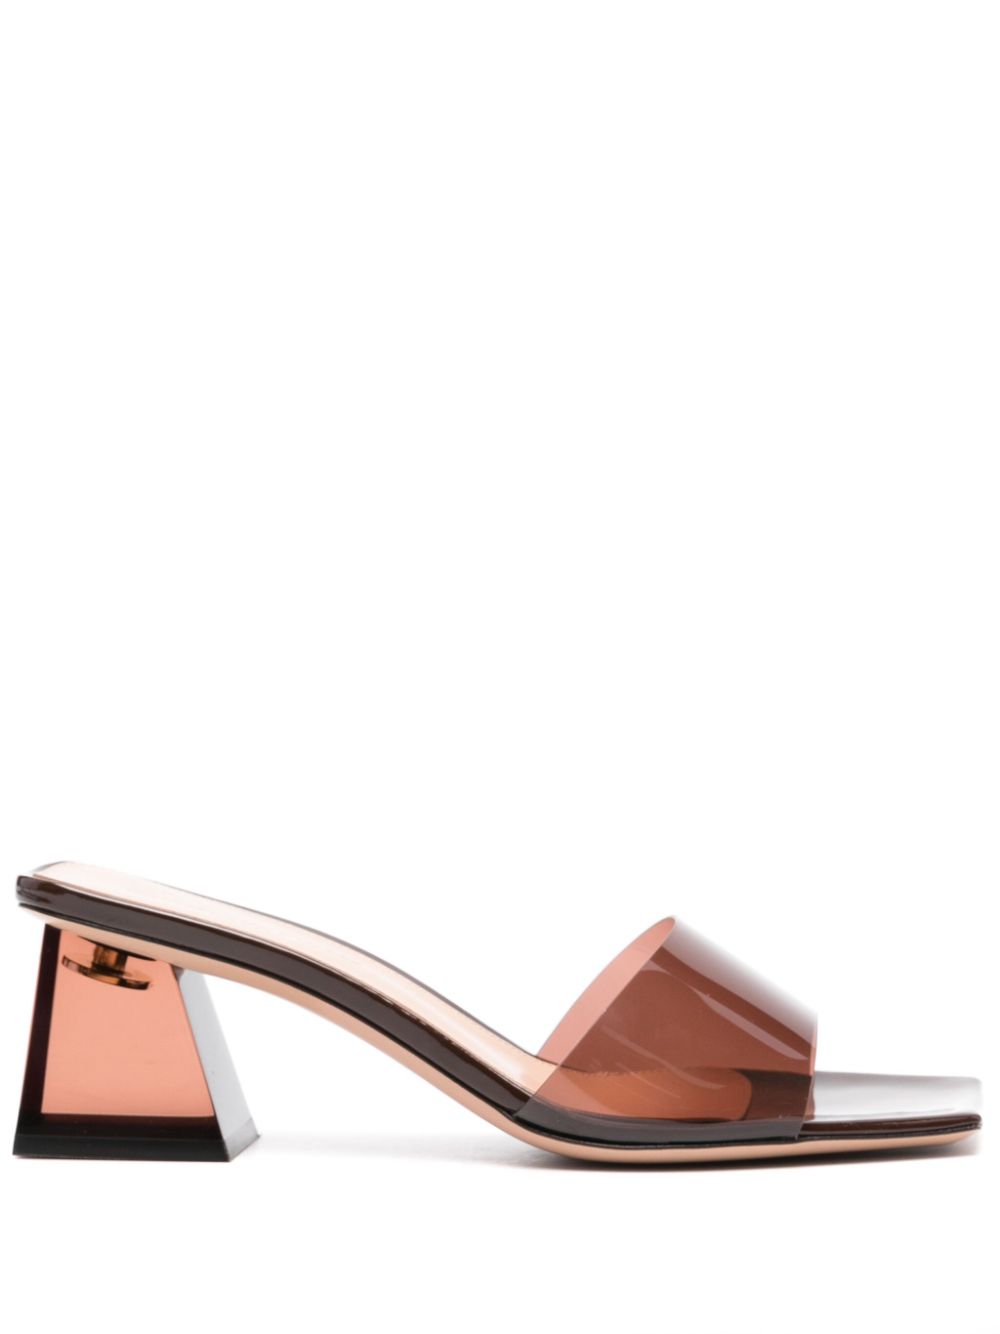 Shop Gianvito Rossi Brown Leather Square Open Toe Slip-on Sandals For Women